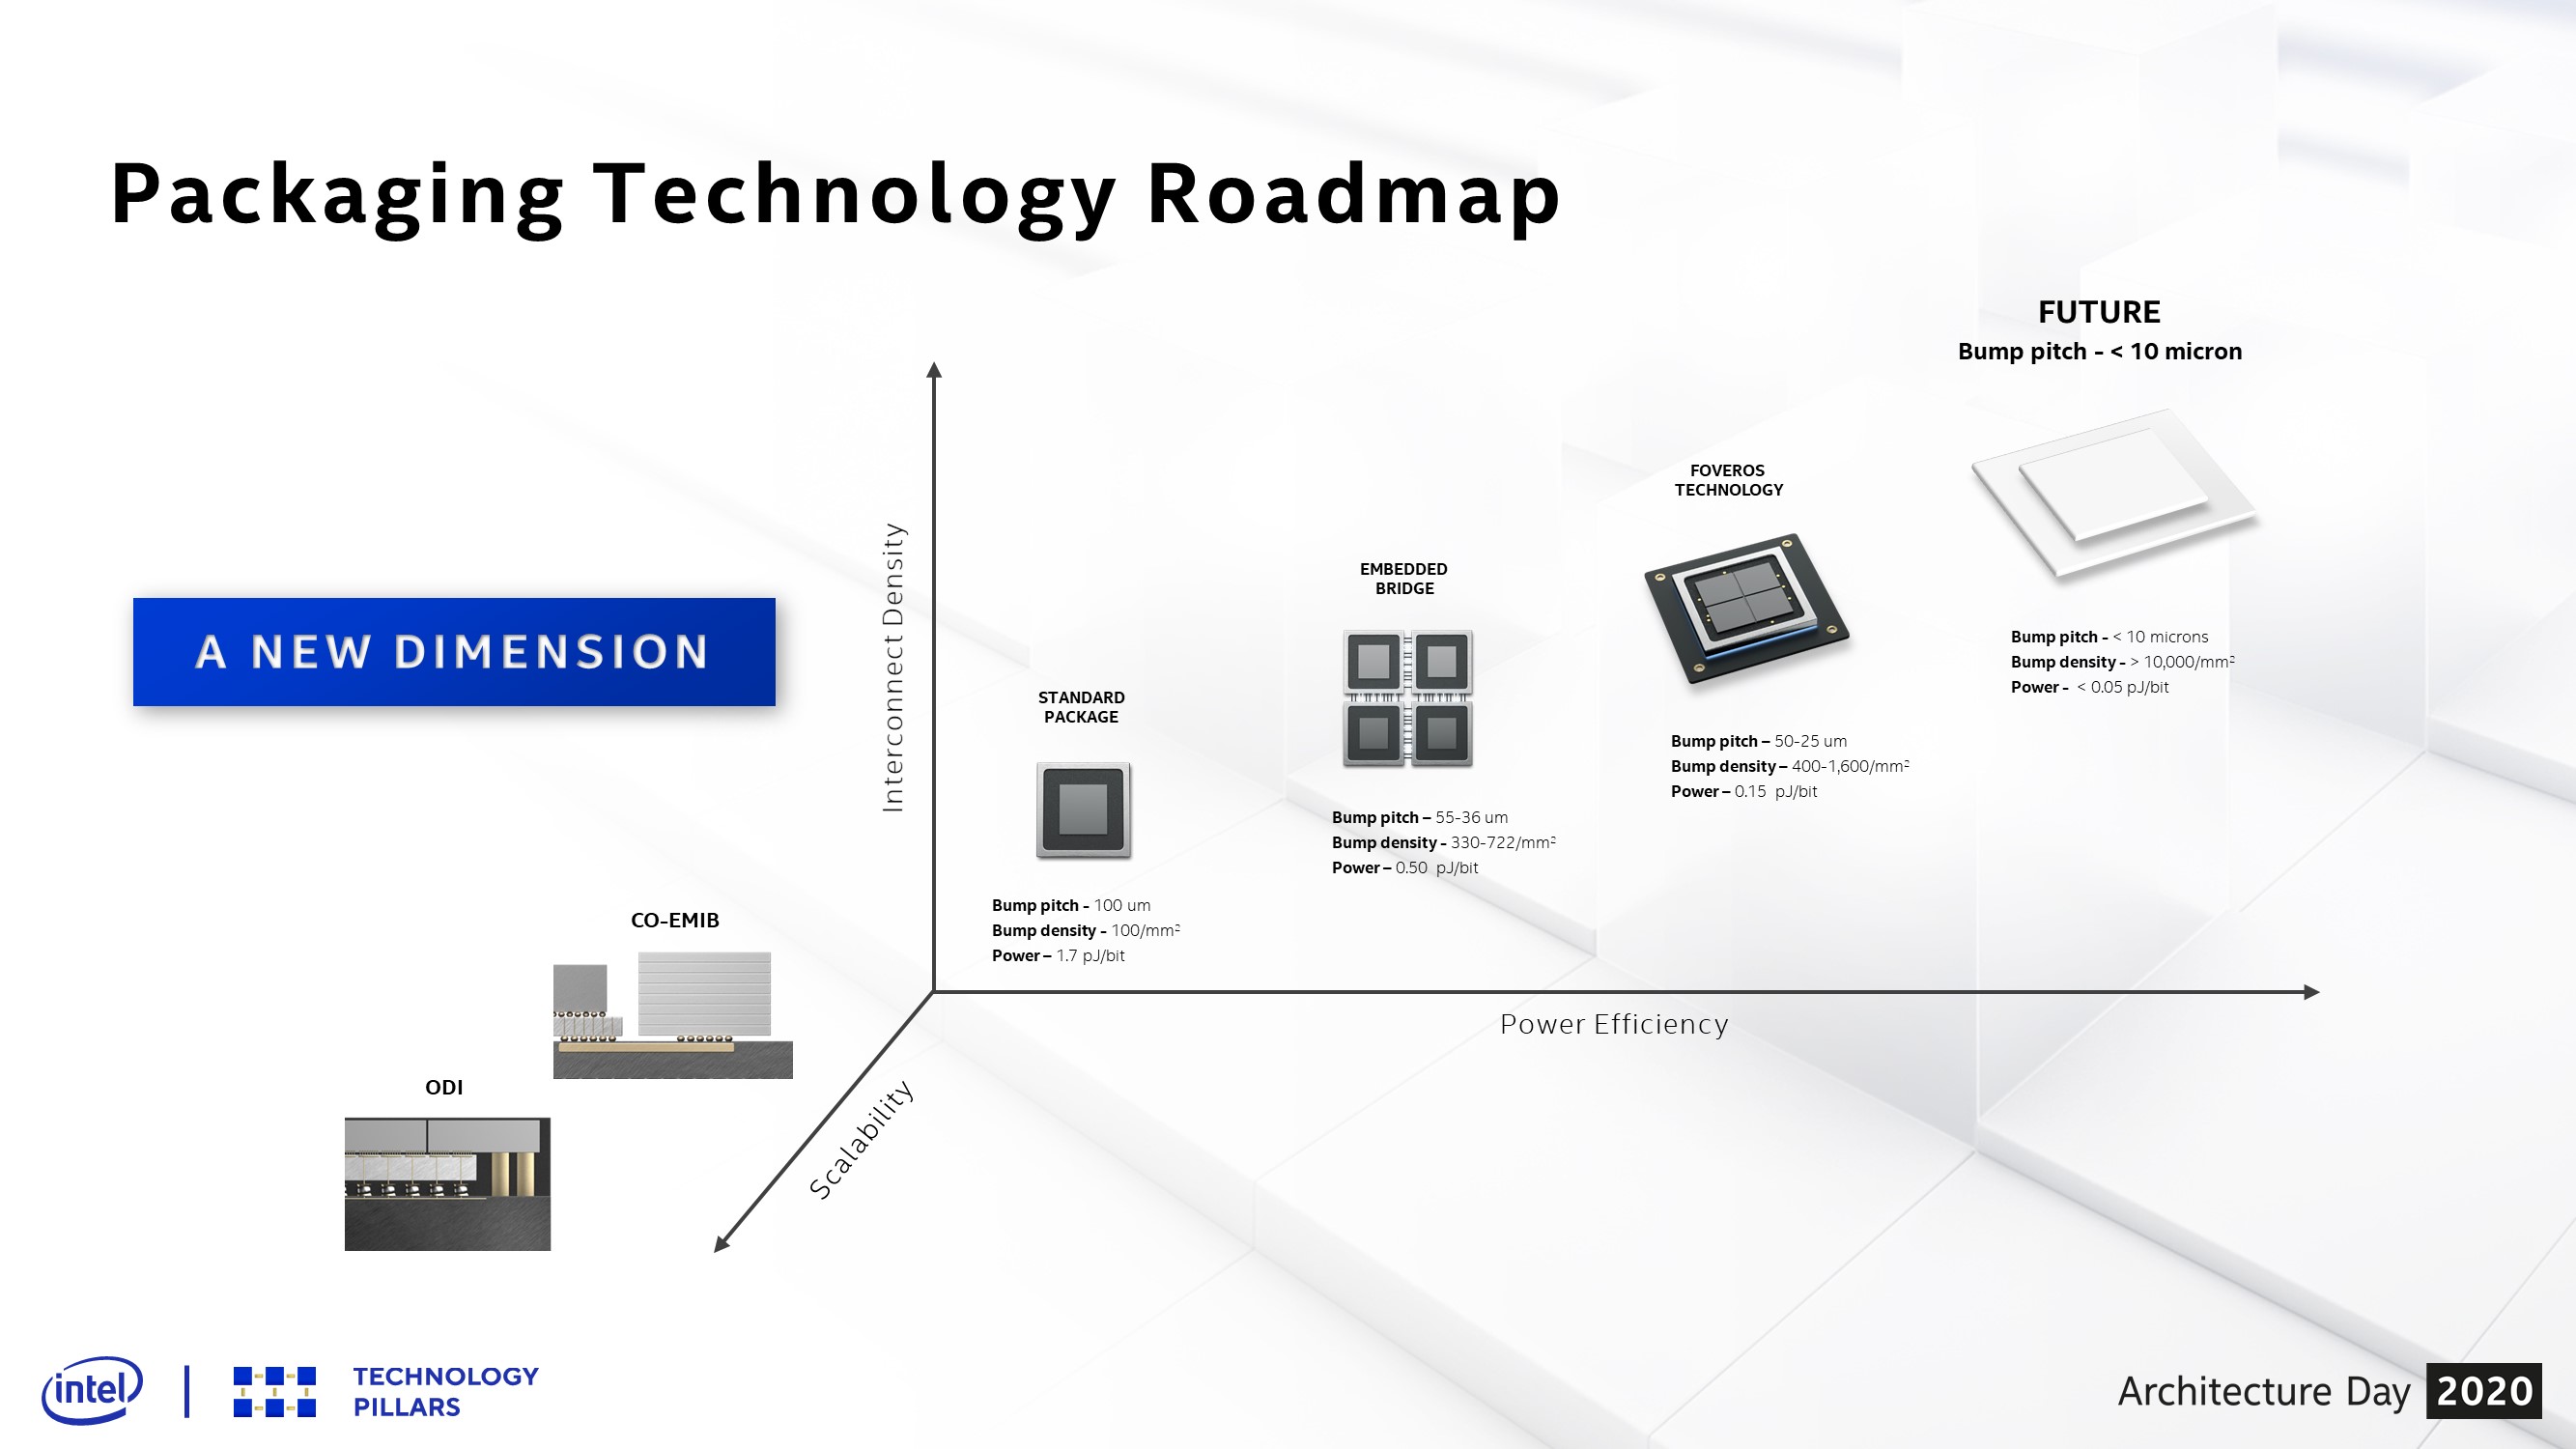 Intel Architecture Day 2020 - Packing Technology Roadmap